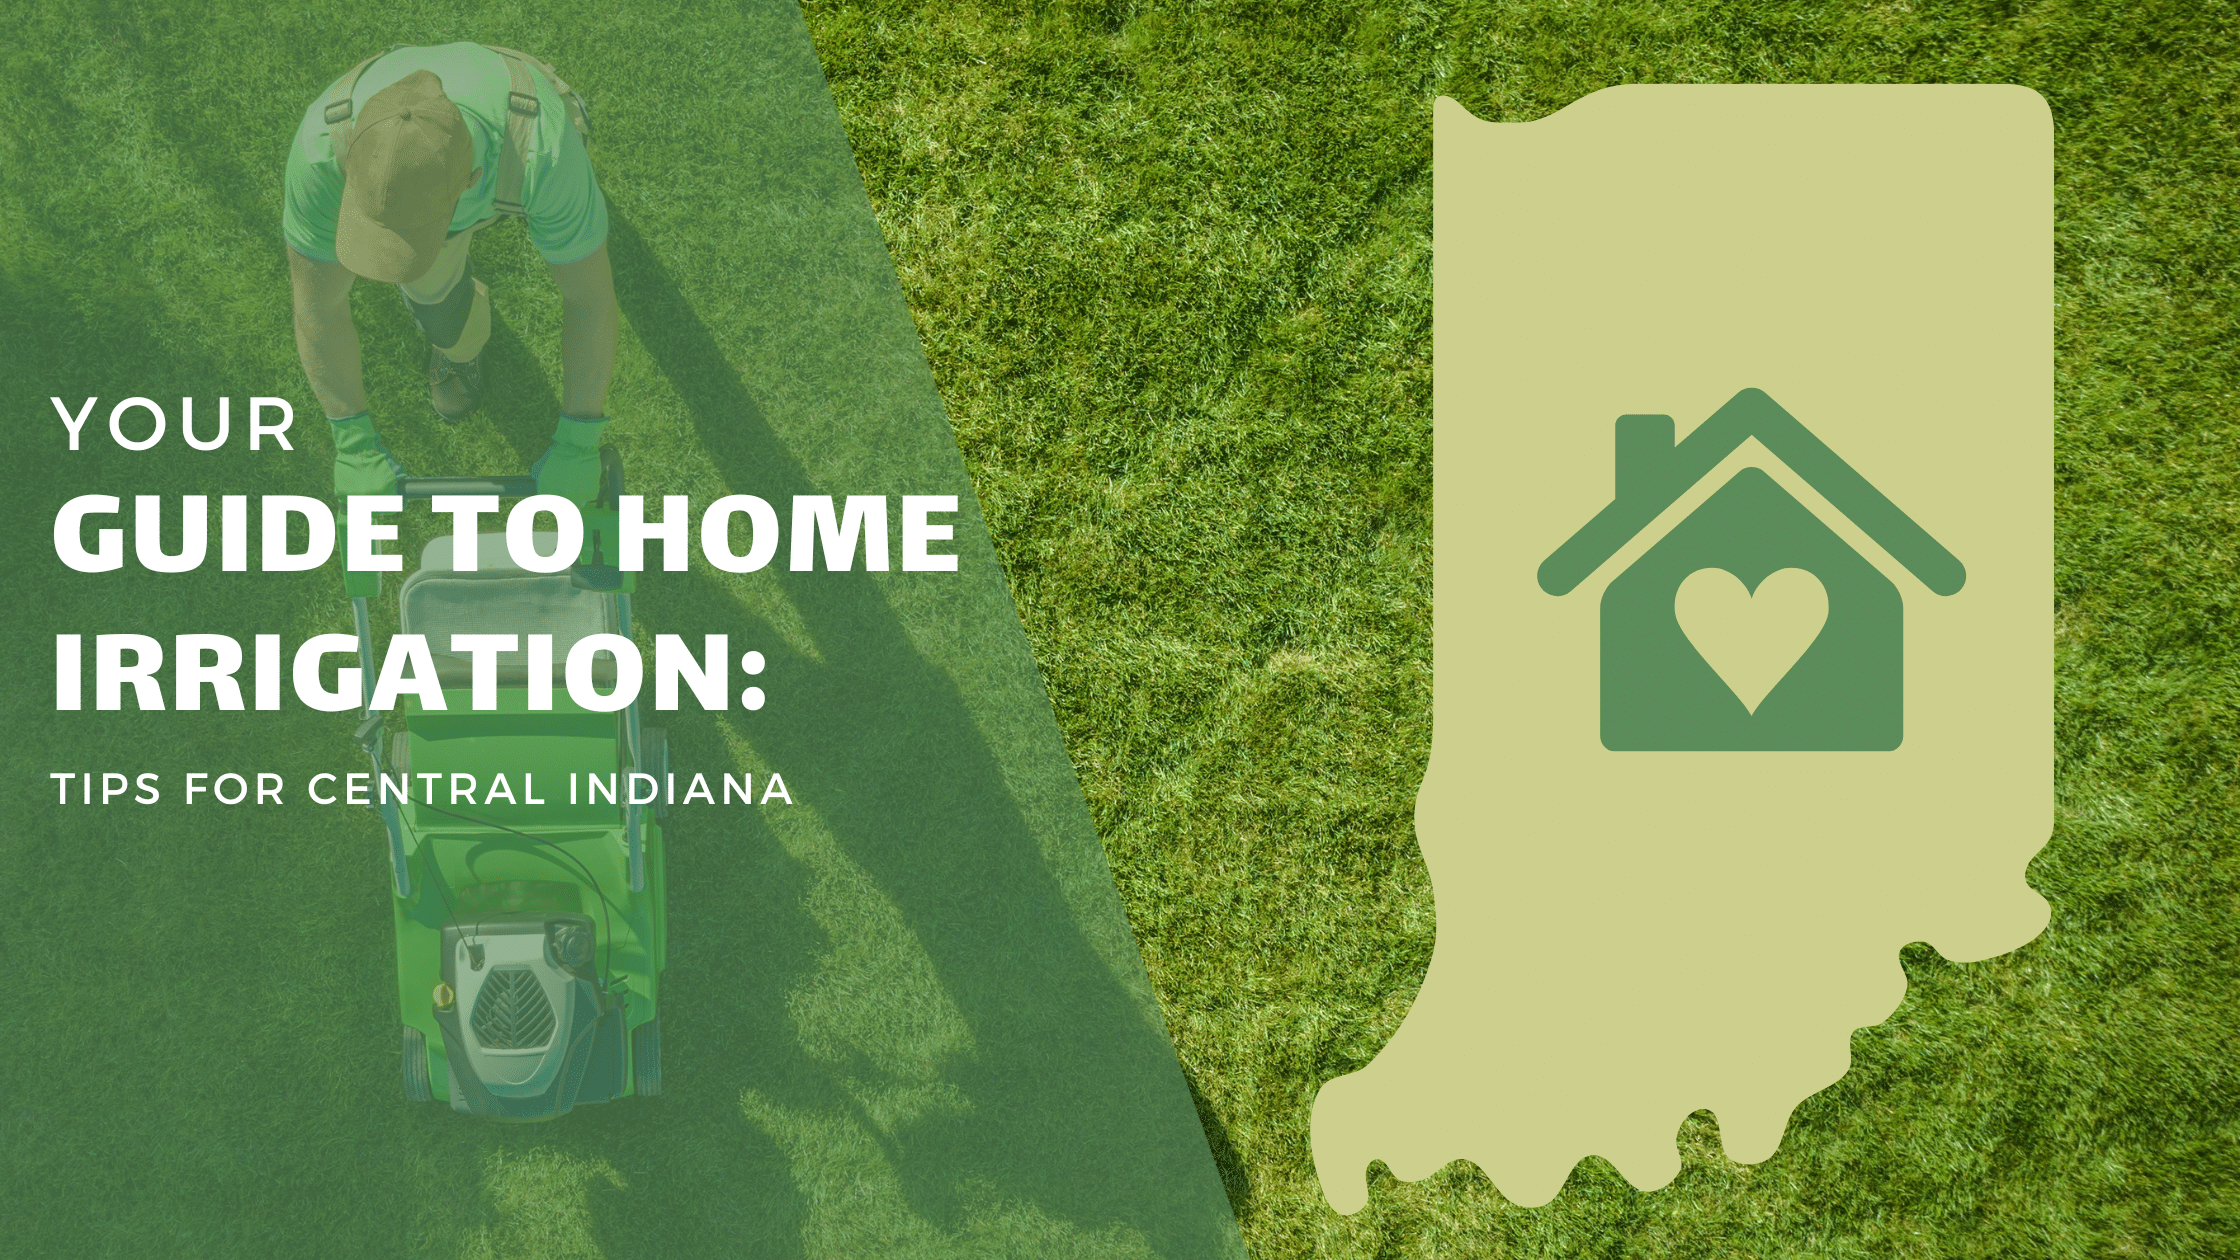 "Your Guide to Home Irrigation: Tips for Central Indiana" overtop a photo of a man mowing lawn, and next to a photo of Indiana with a home graphic in the middle of it. Irrigation Indiana lawn care.